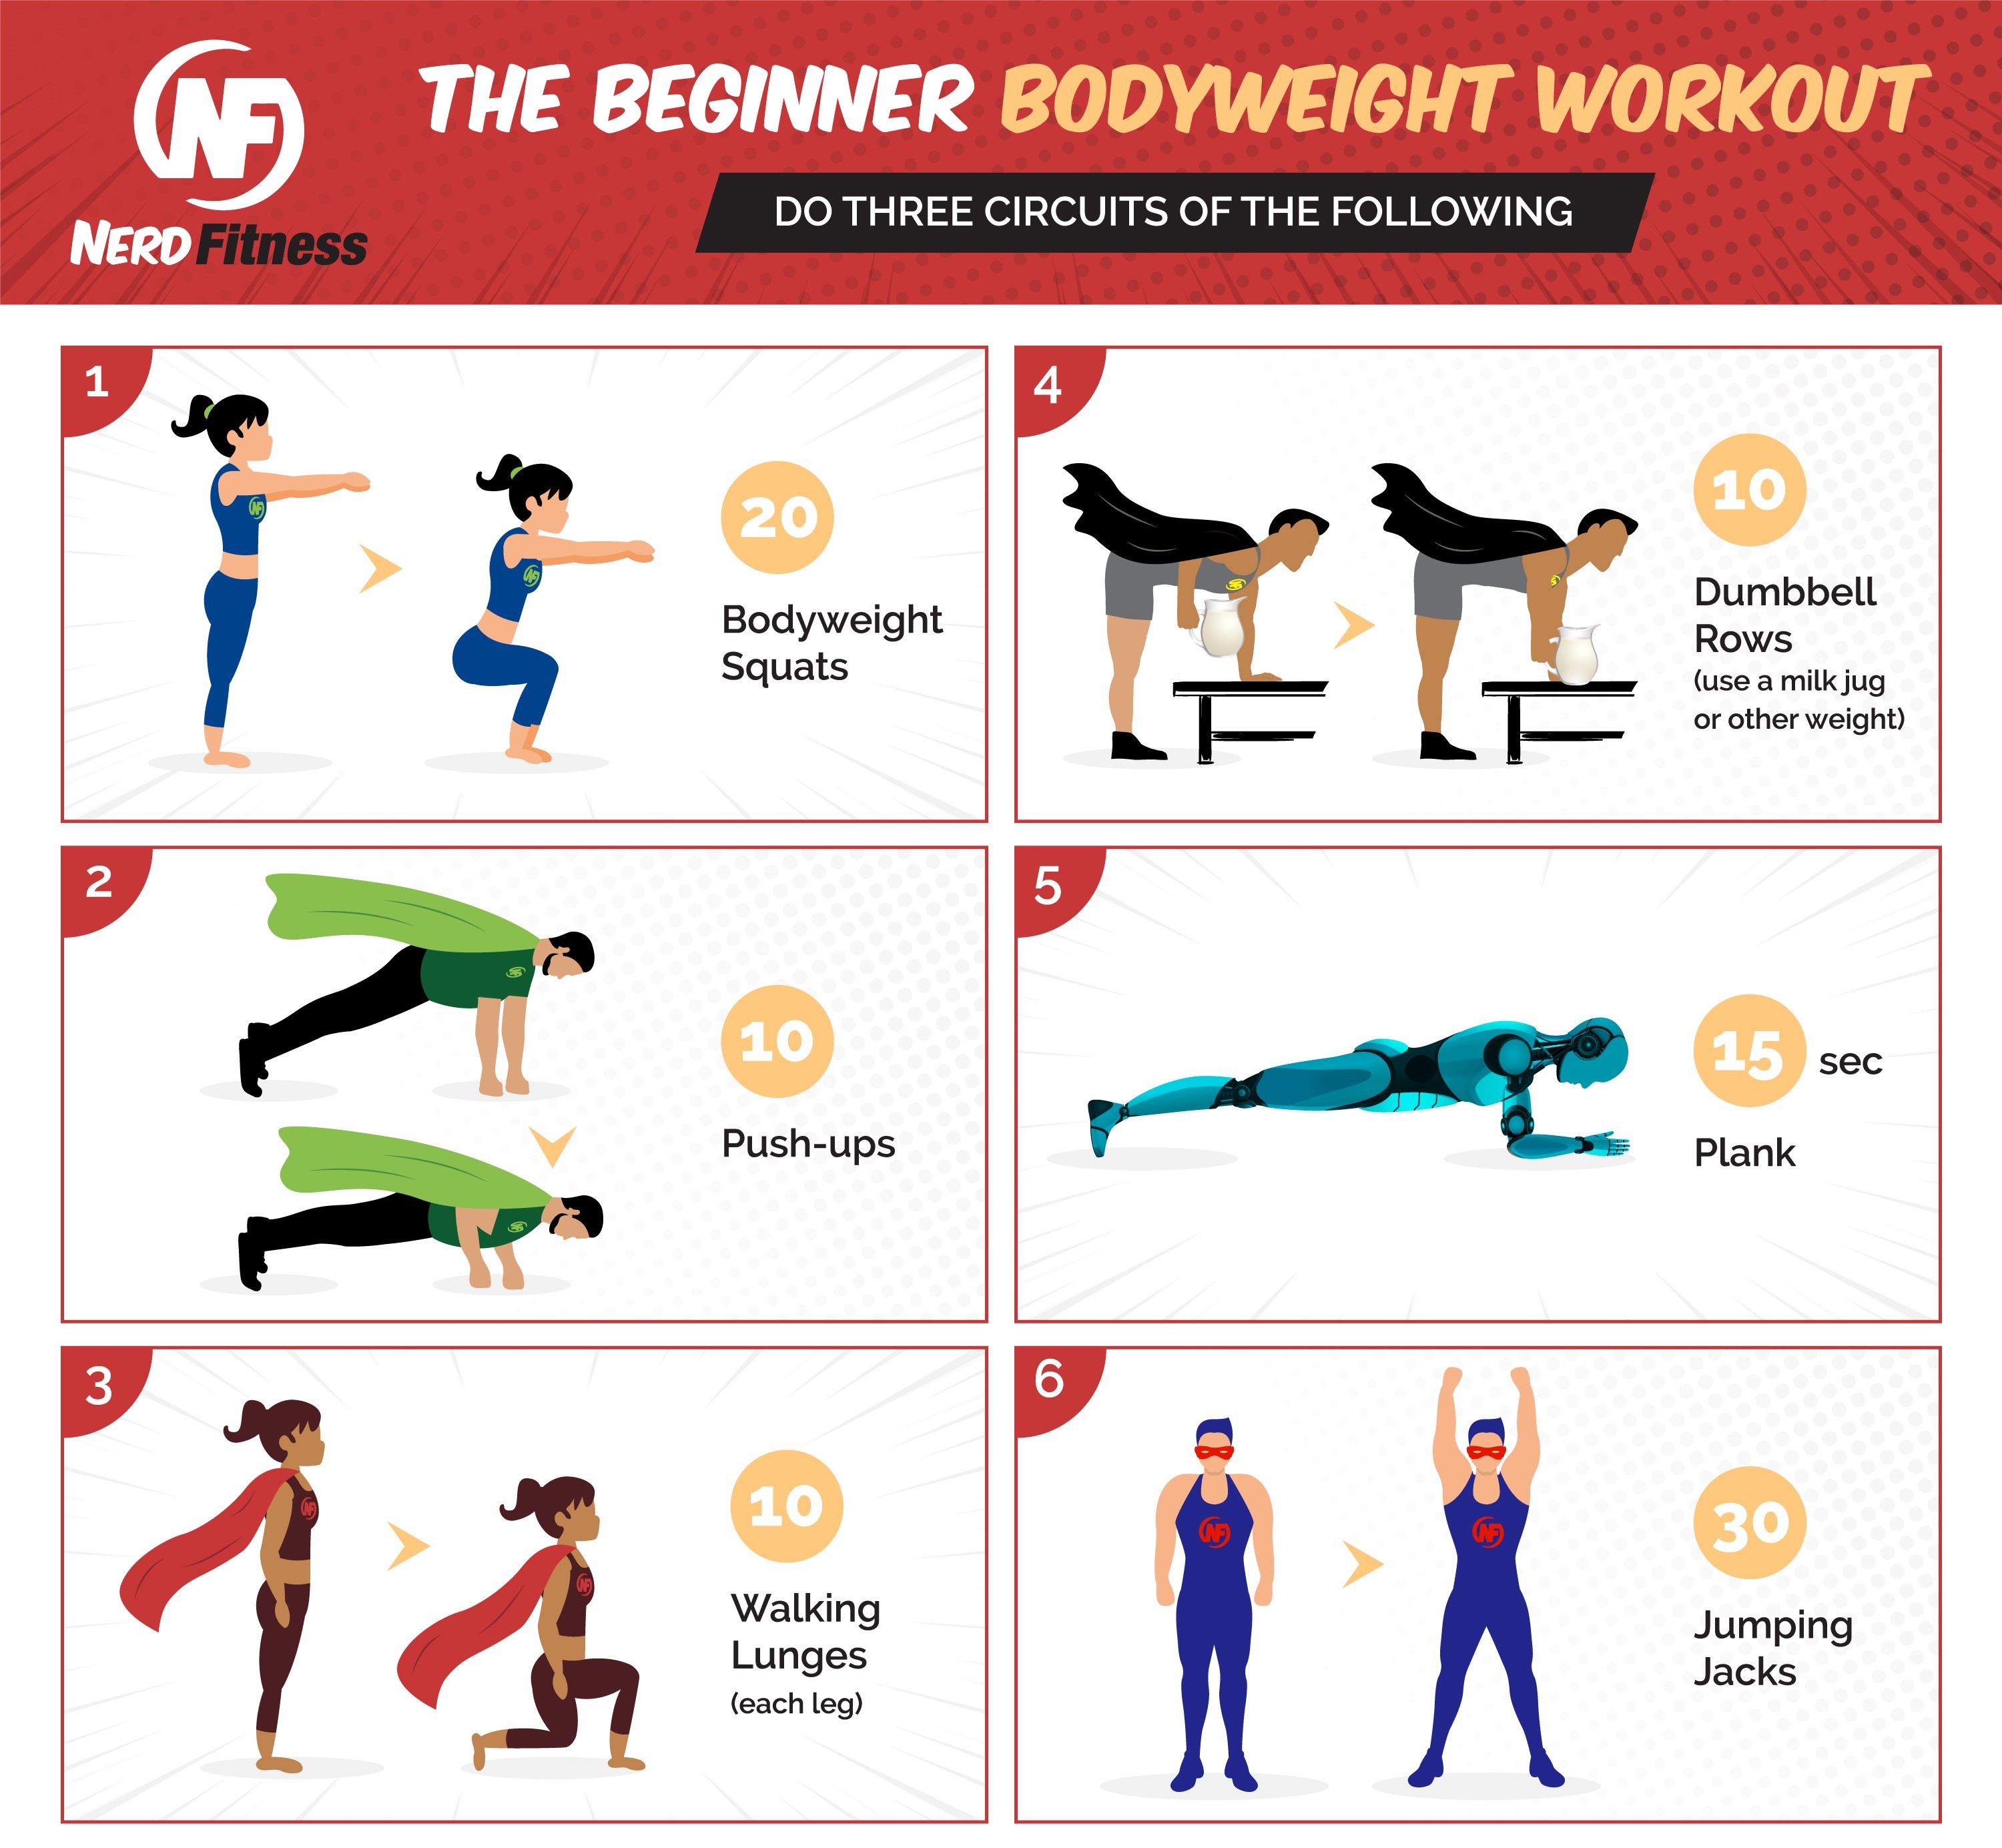 the-beginner-bodyweight-workout-try-this-20-minute-routine-at-home-or-anywhere-nerd-fitness